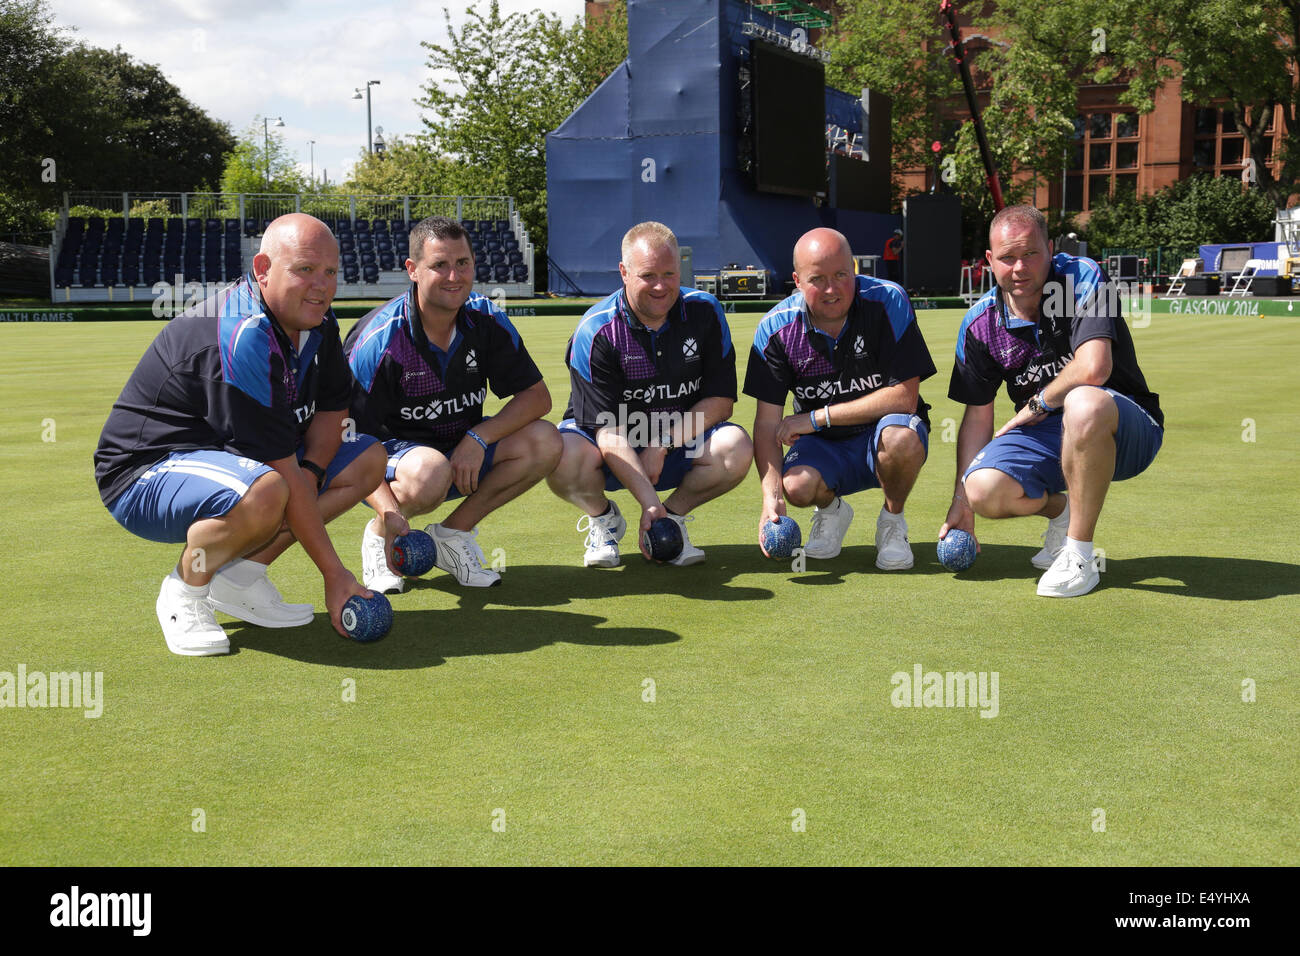 Kelvingrove Lawn Bowls Centre, Glasgow, Scotland, UK, Thursday, 17th July, 2014. Team Scotland Men's Team in the venue for the 2014 Commonwealth Games Lawn Bowls Competition left to right, Alex Marshall, Neil Speirs, Darren Burnett, David Peacock and Paul Foster Stock Photo